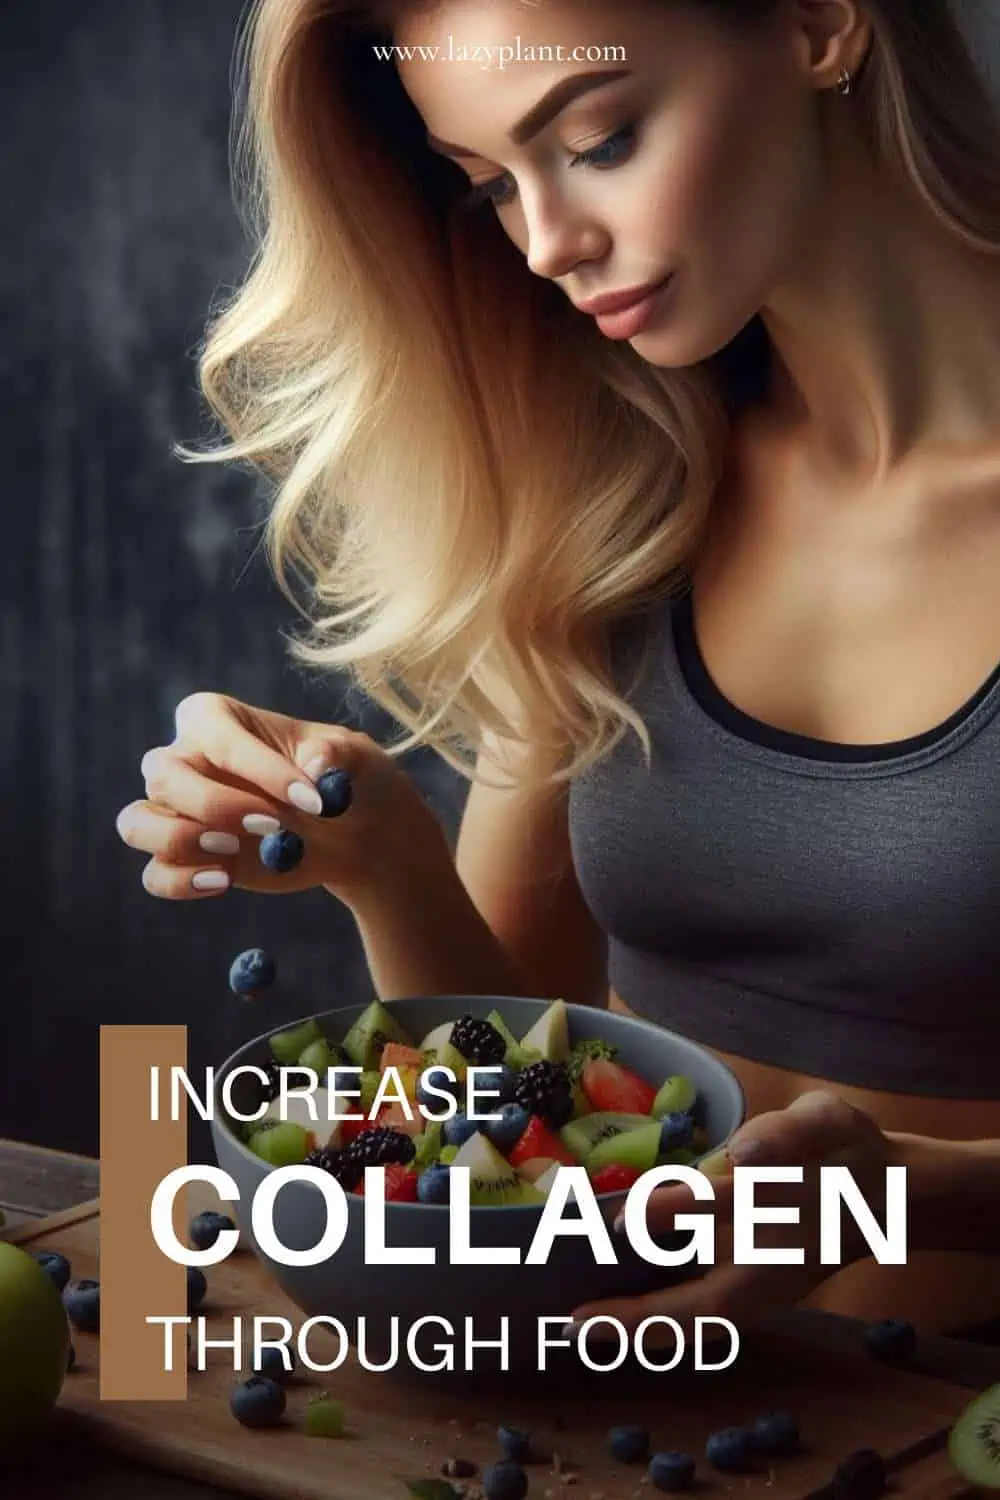 Recipe ideas to increase collagen synthesis.